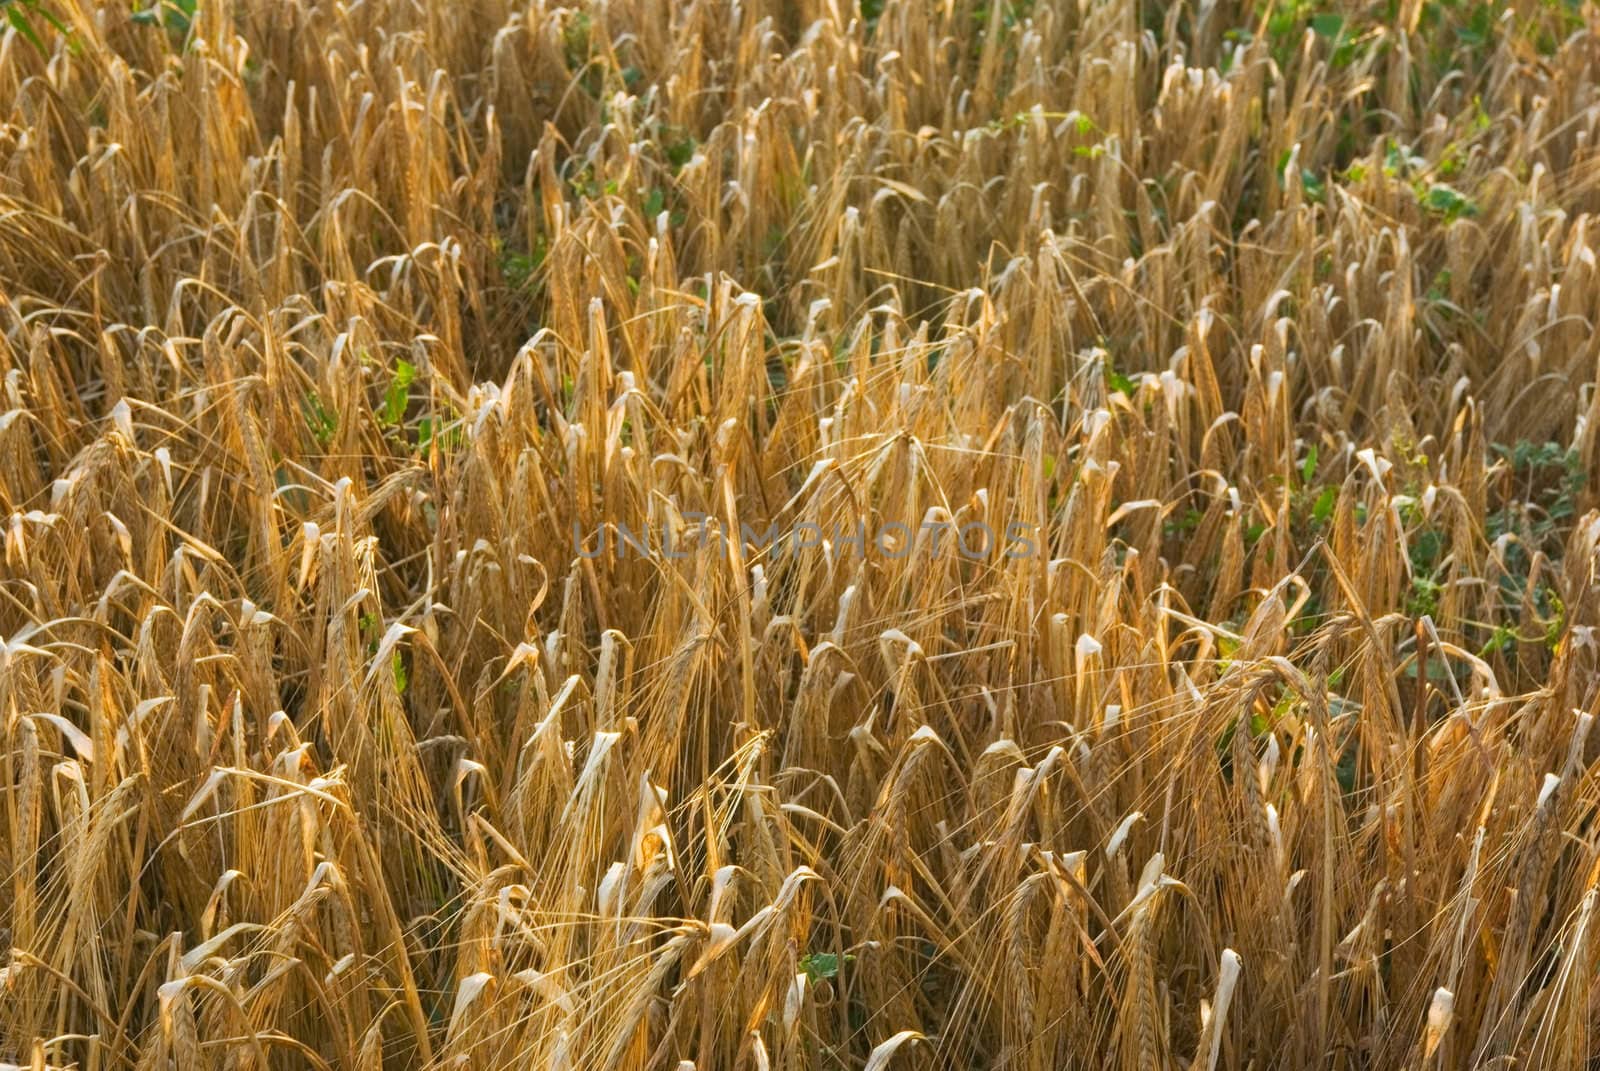 Ripened spikes of wheat field